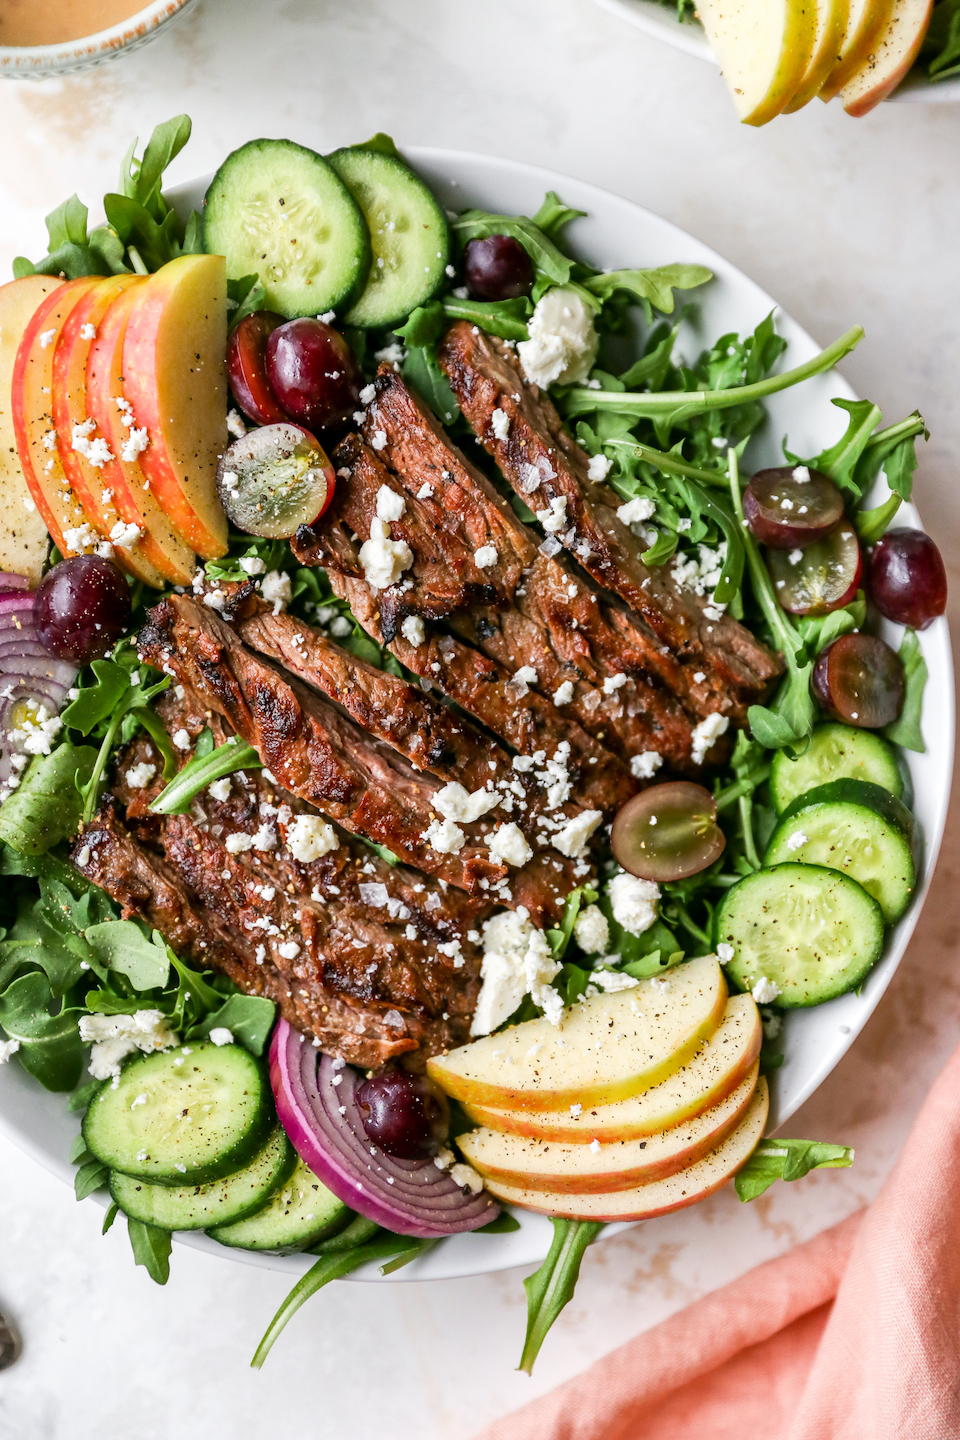 Marinated Skirt Steak Salad with Grapes, Apples, & Feta - Yes to Yolks